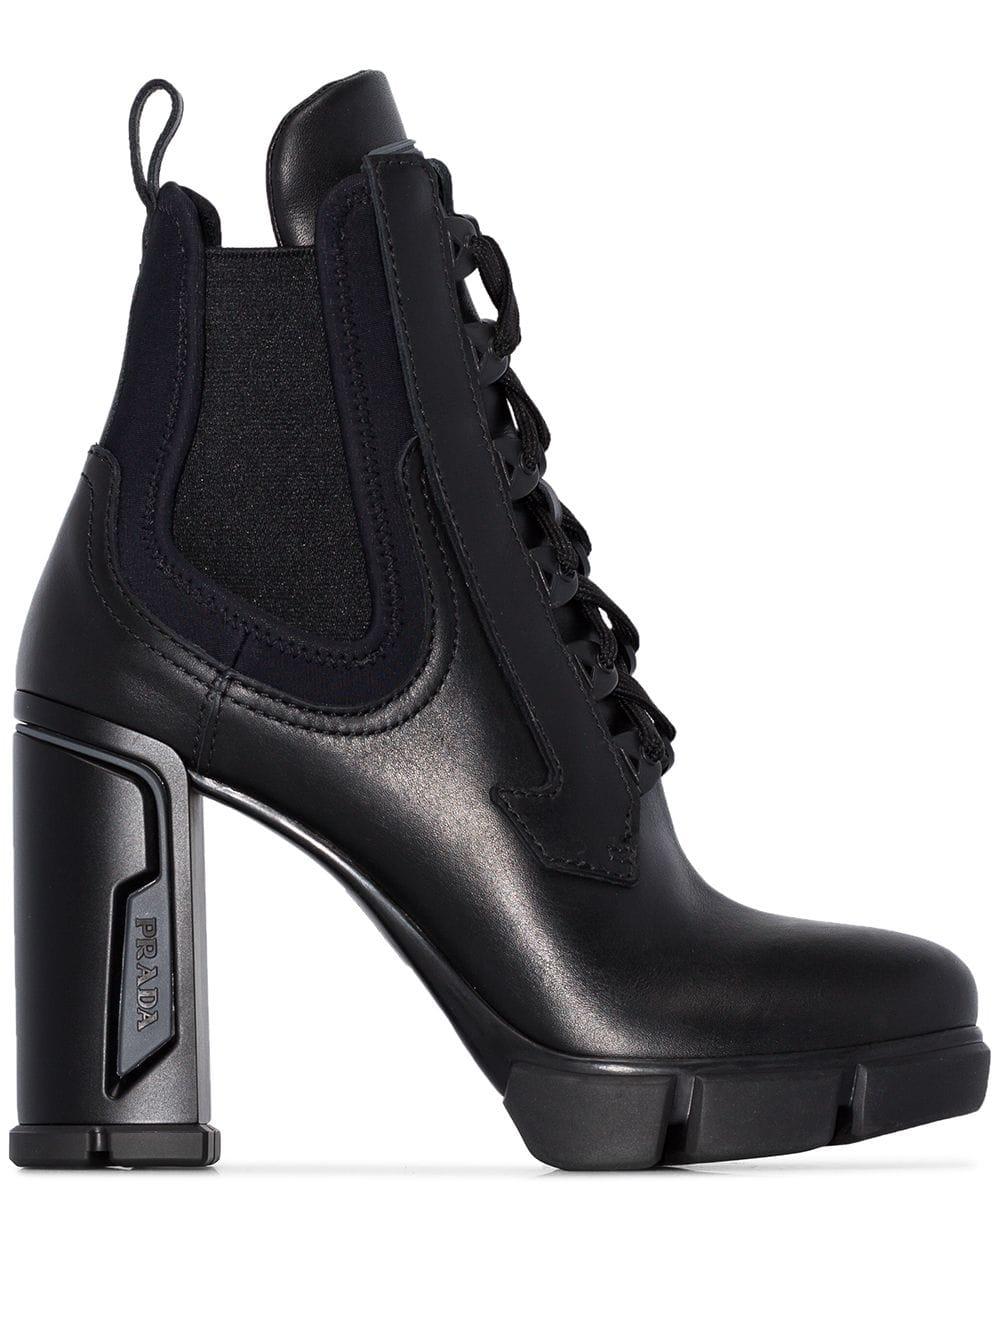 Prada Lace-up 110mm Military Ankle Boots in Black | Lyst